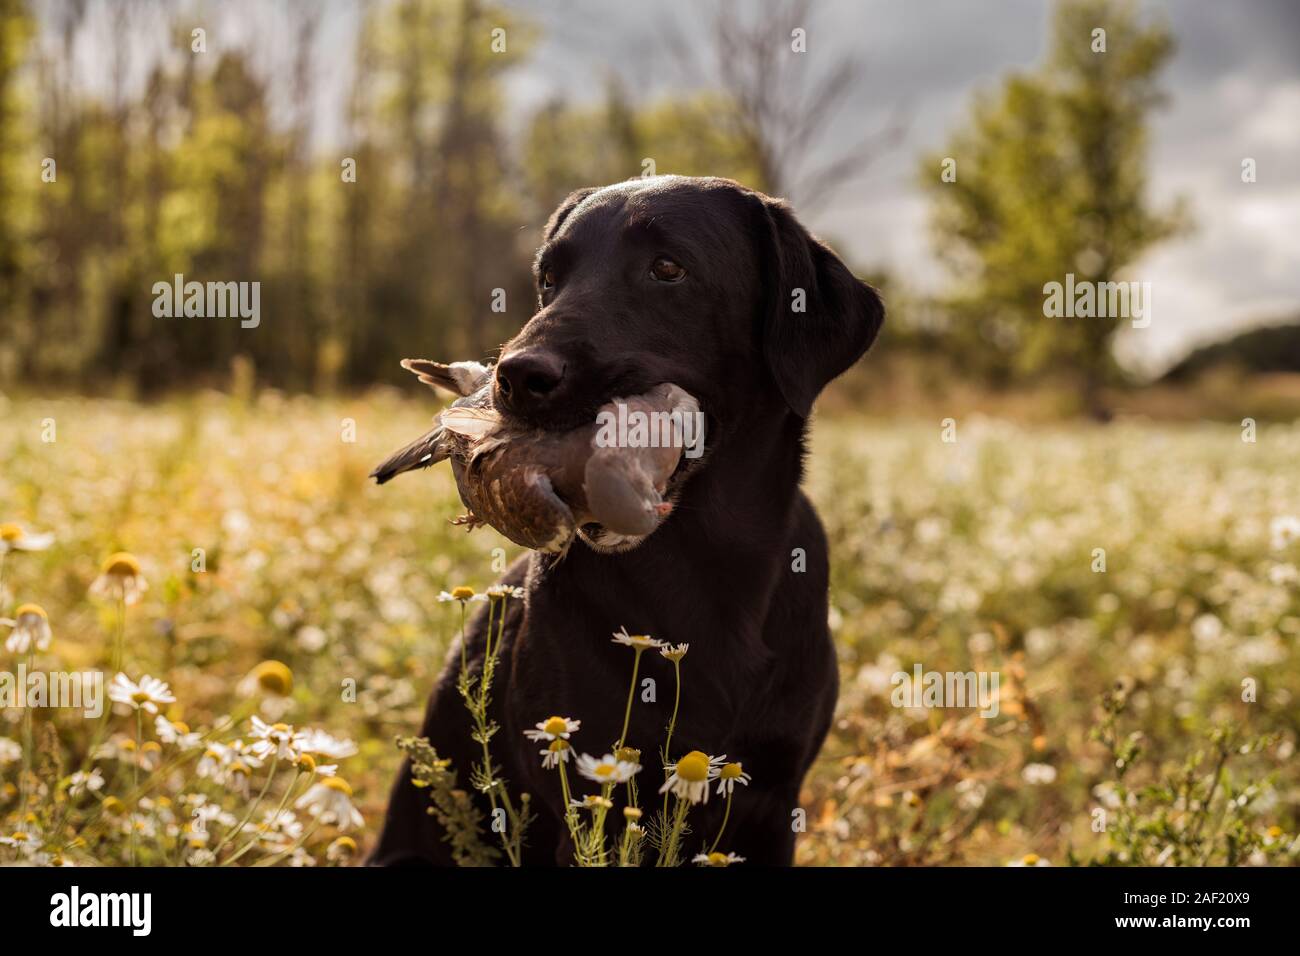 Hunting dog carrying dead bird Stock Photo